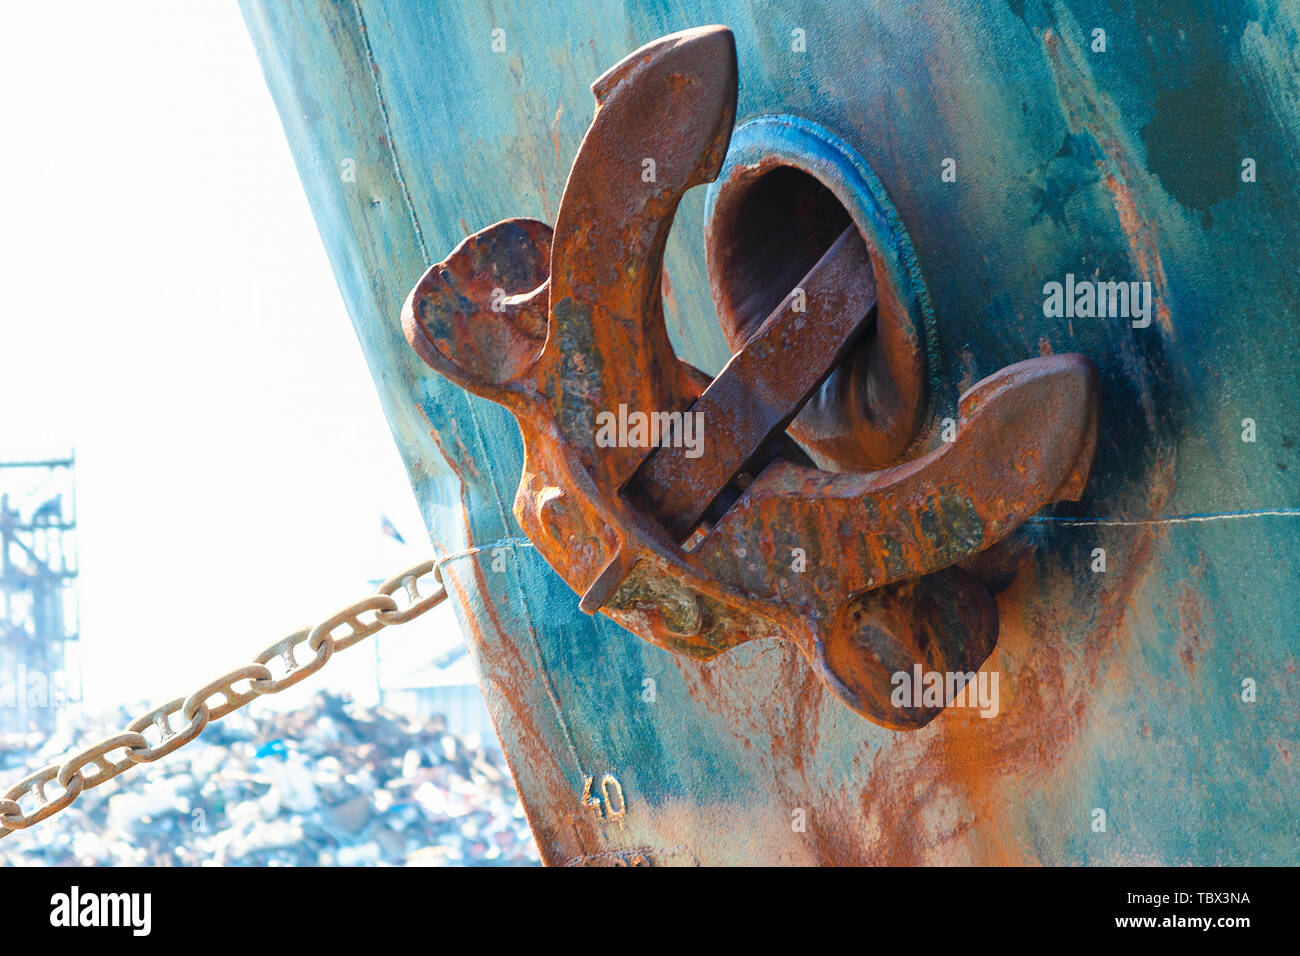 ship anchor in up position. Heavy metal anchor on the side of the ship. Stock Photo